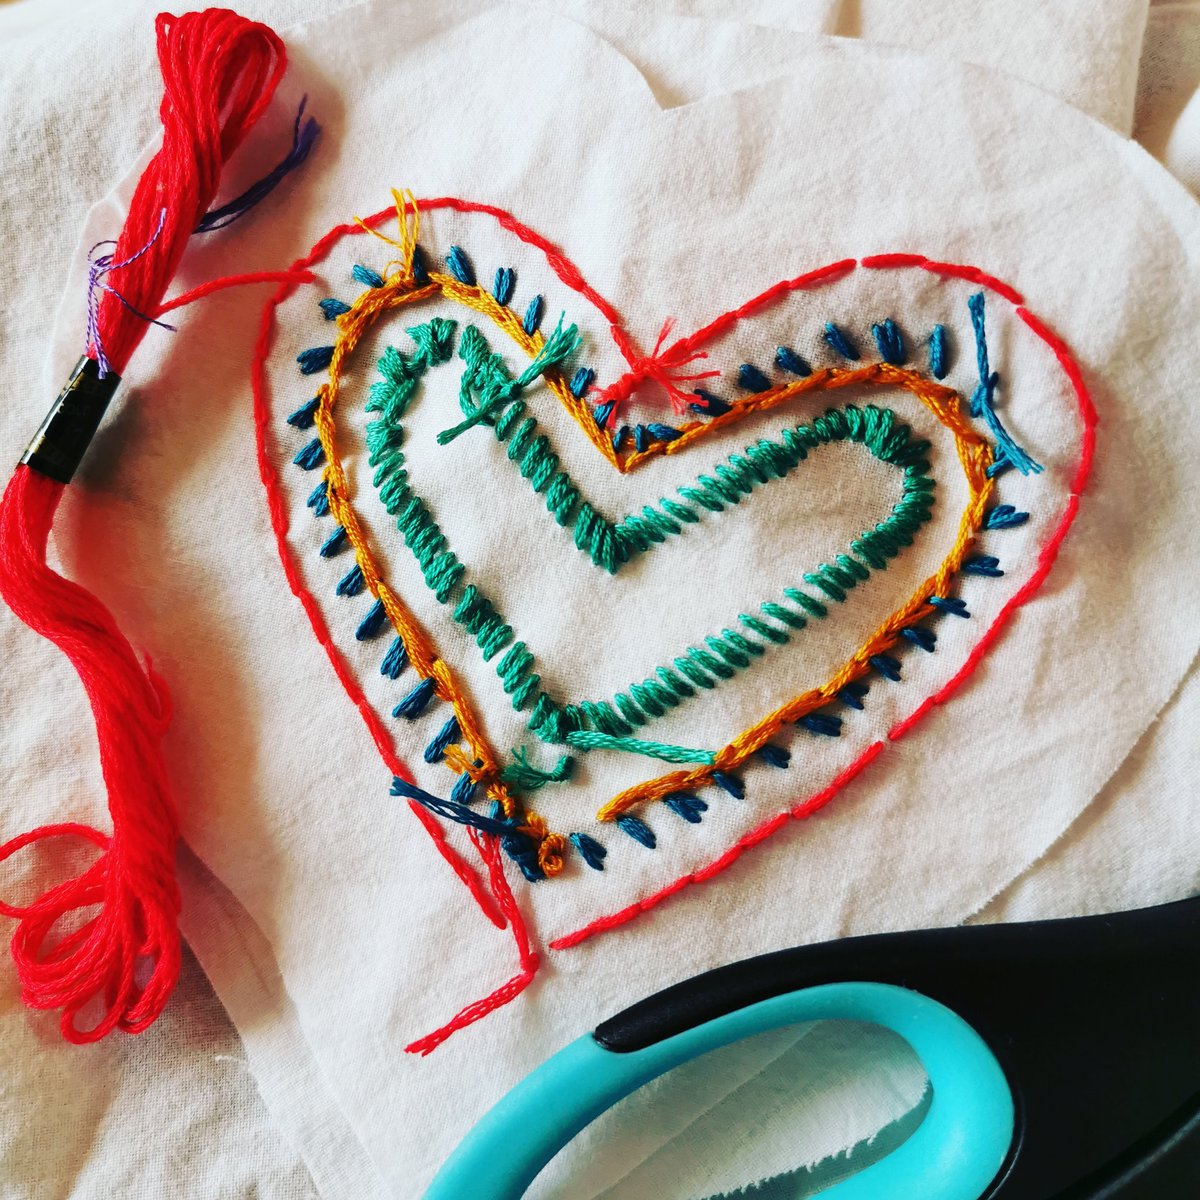 Back view..... starting on a love token for a February Embroidery Workshop.
#mindfulness #embroidery #craft #relaxation #creativity #calm #focus #dexterity #making #makersgonnamake #heart #lovetoken #loveyourself #slowdown #slowstitching #upcycle #mindfulnessthroughmaking